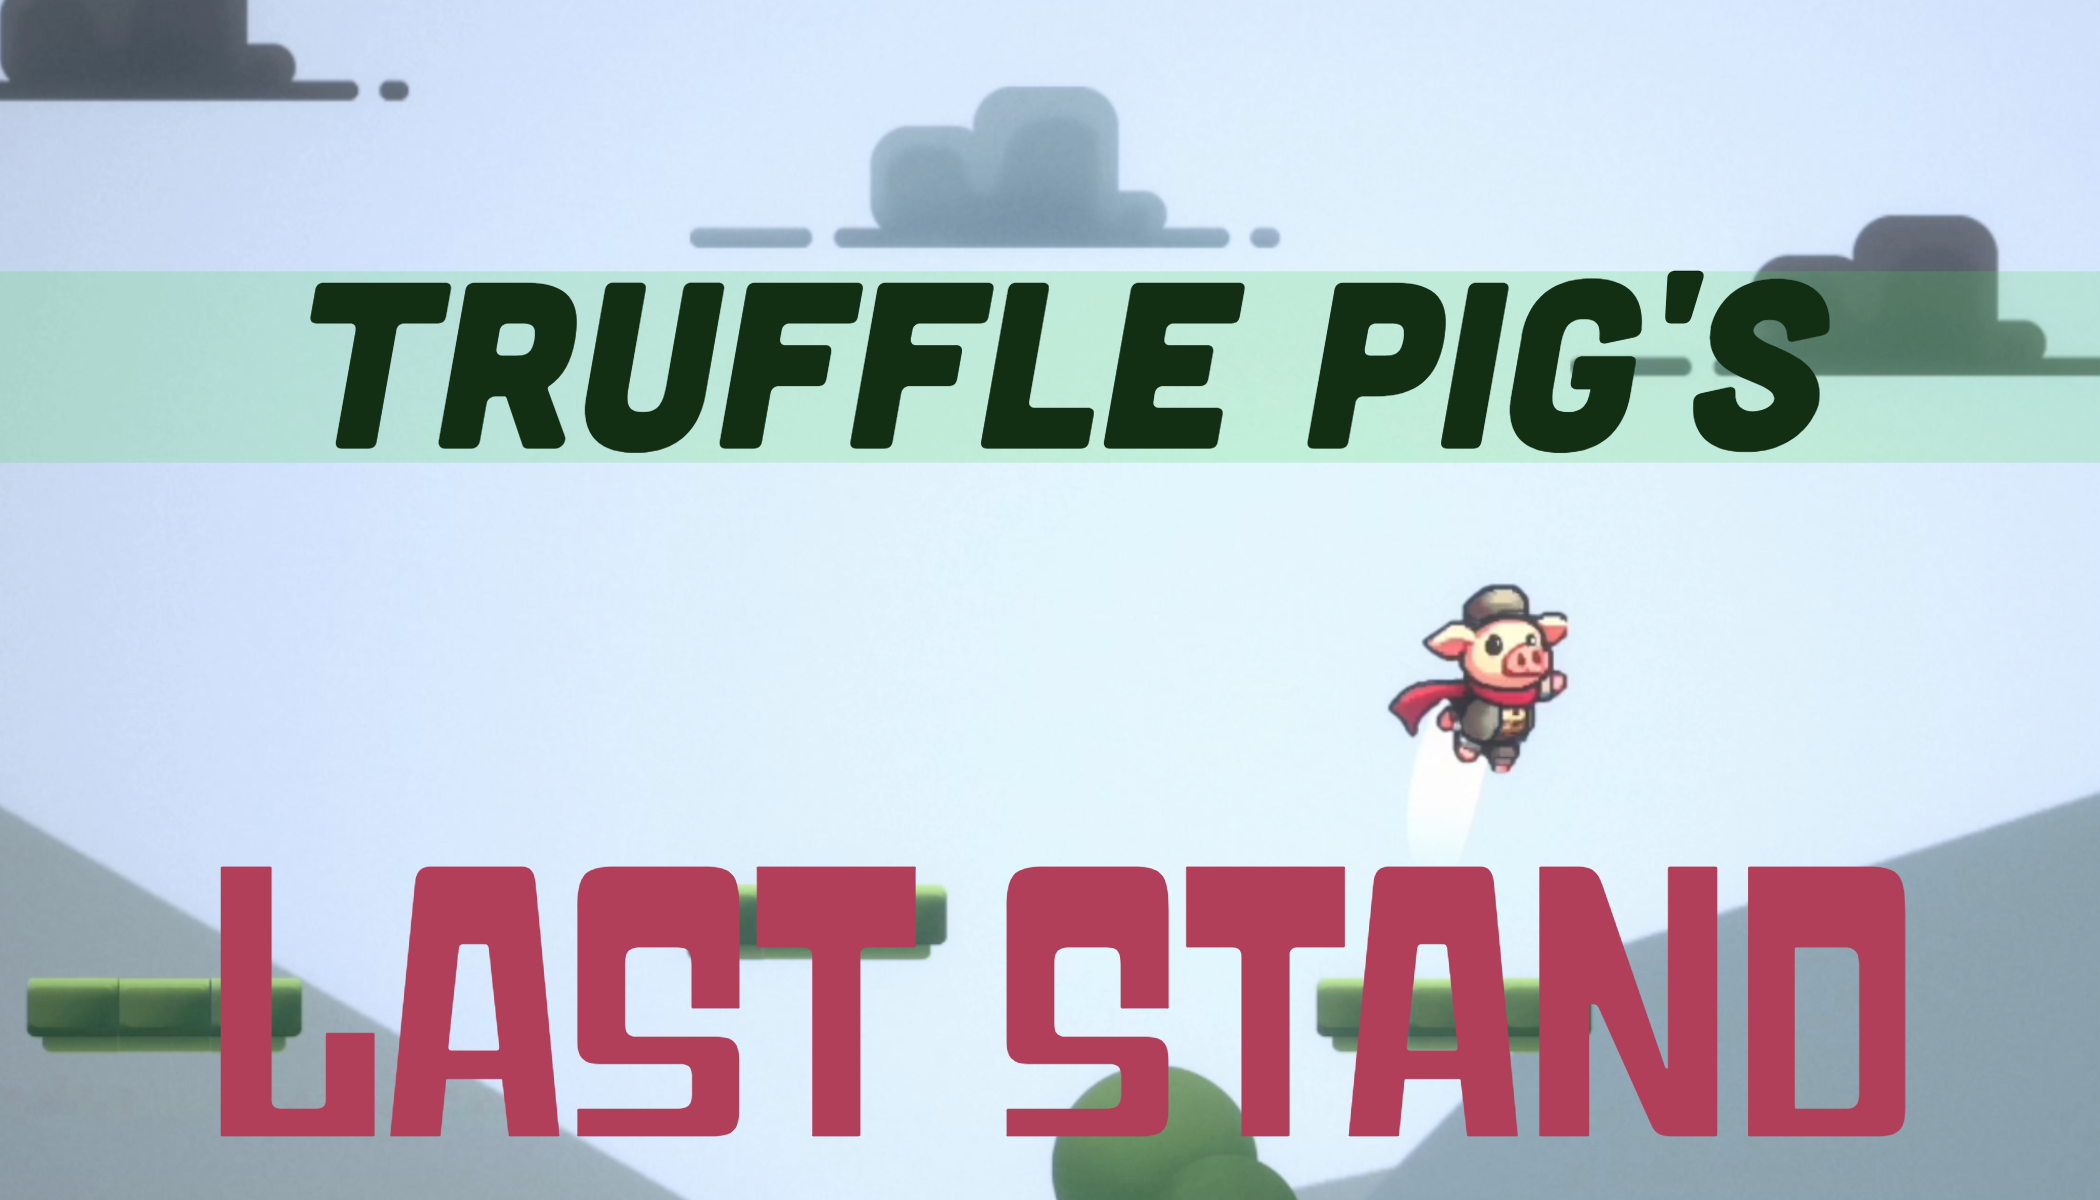 Truffle Pig's - Last Stand